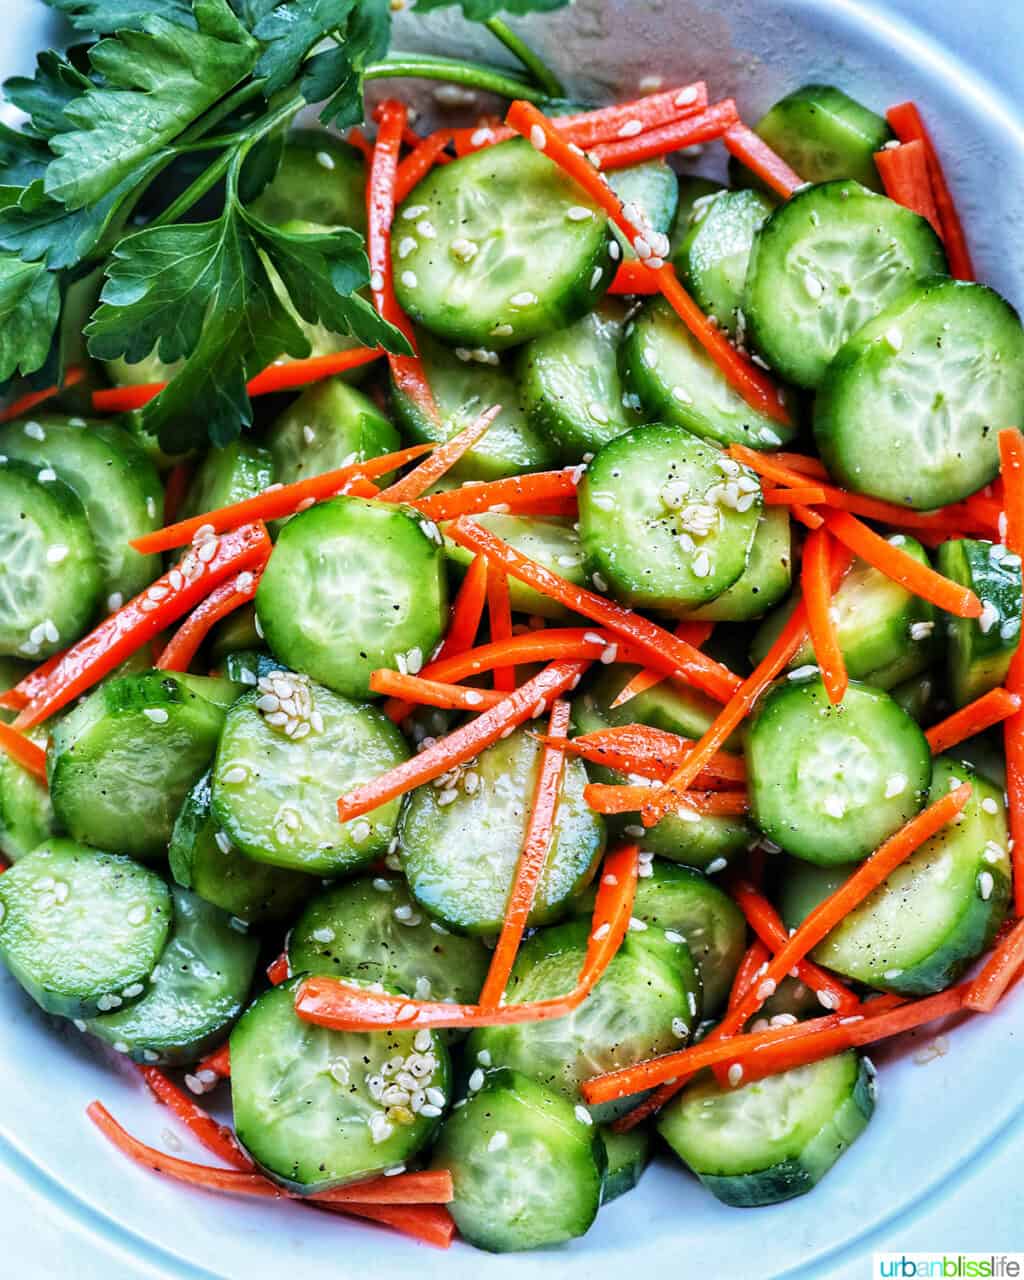 salad bowl full of sliced cucumbers, carrots, and sesame seeds.